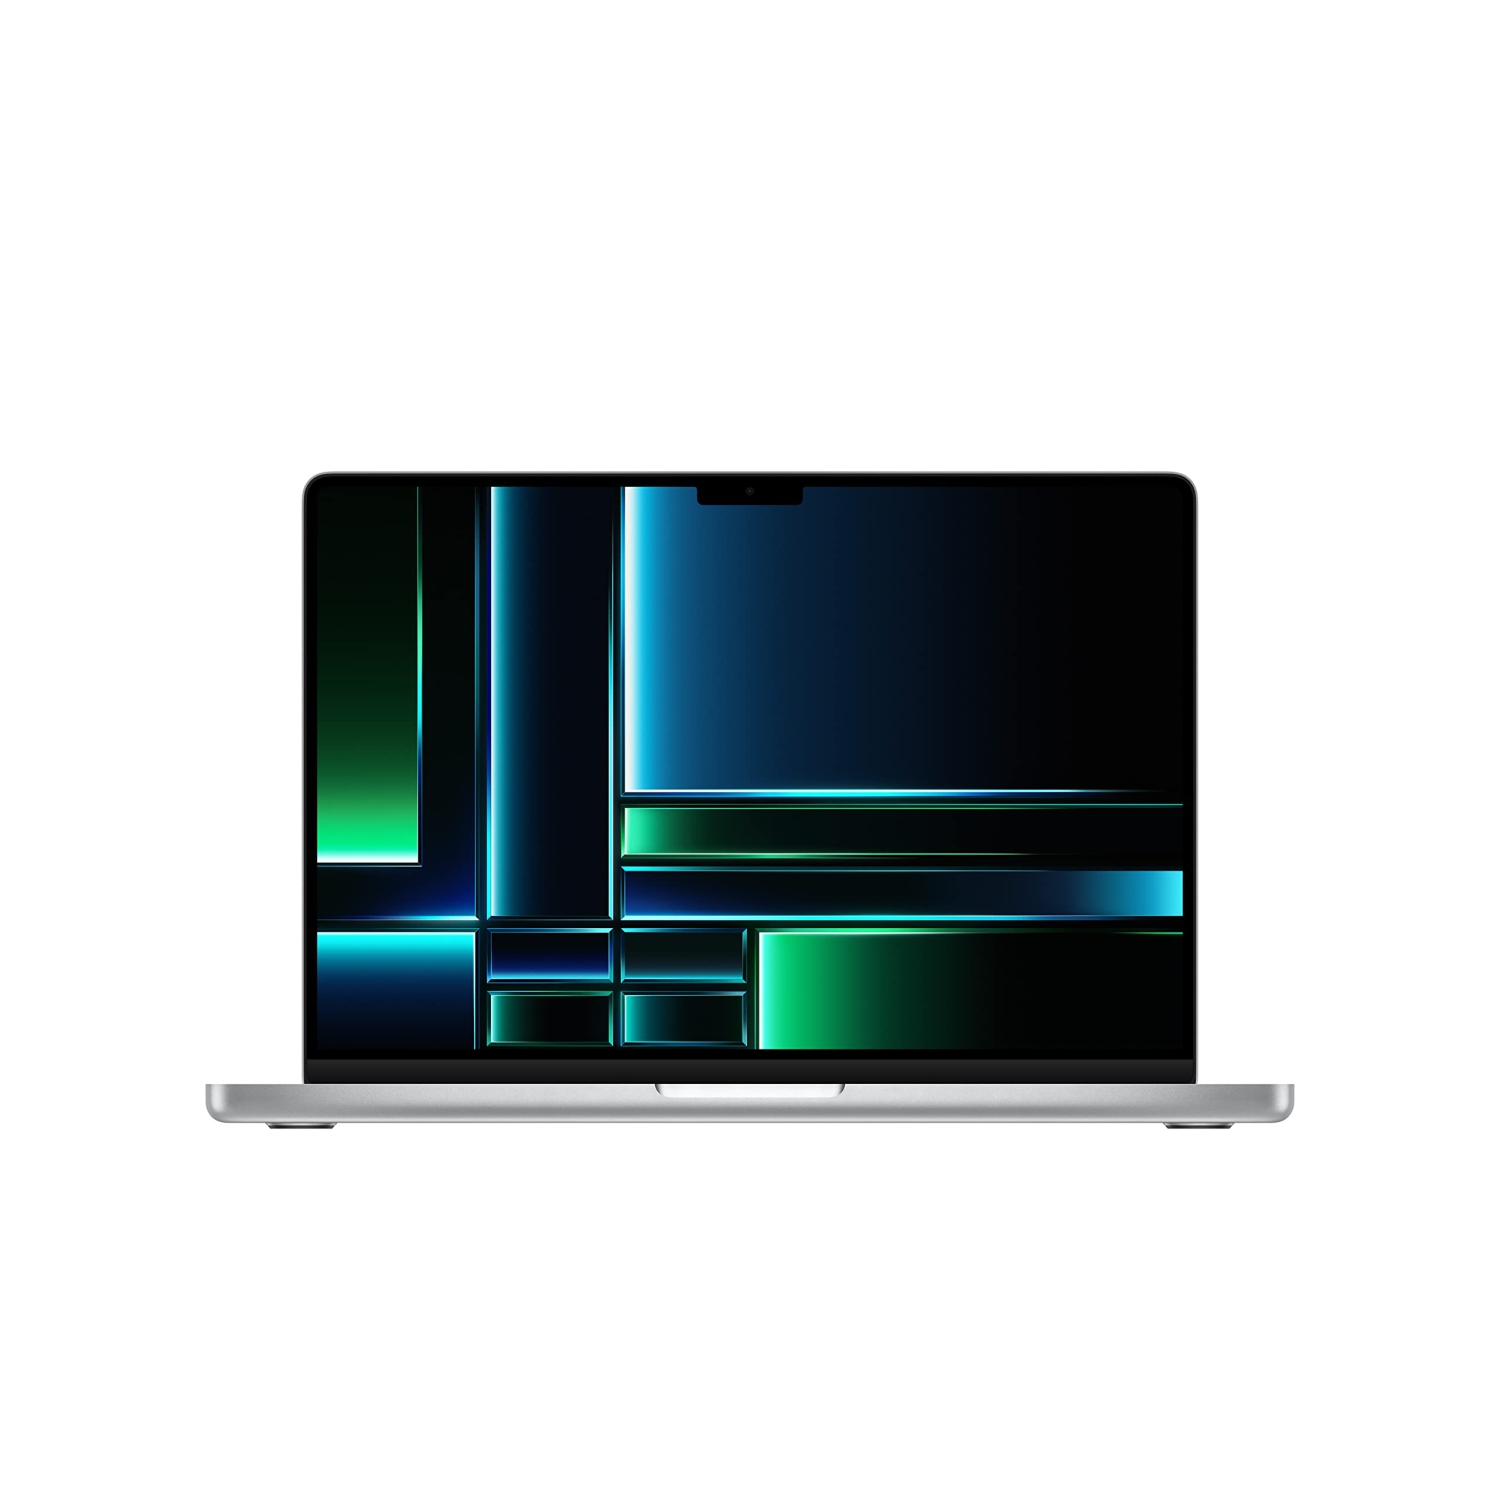 Refurbished (Excellent) - Apple 2023 MacBook Pro Laptop M2 Max chip with 12‑core CPU and 30‑core GPU: 14.2-inch Liquid Retina XDR Display, 32GB Unified Memory, 1TB SSD Storage. Wor